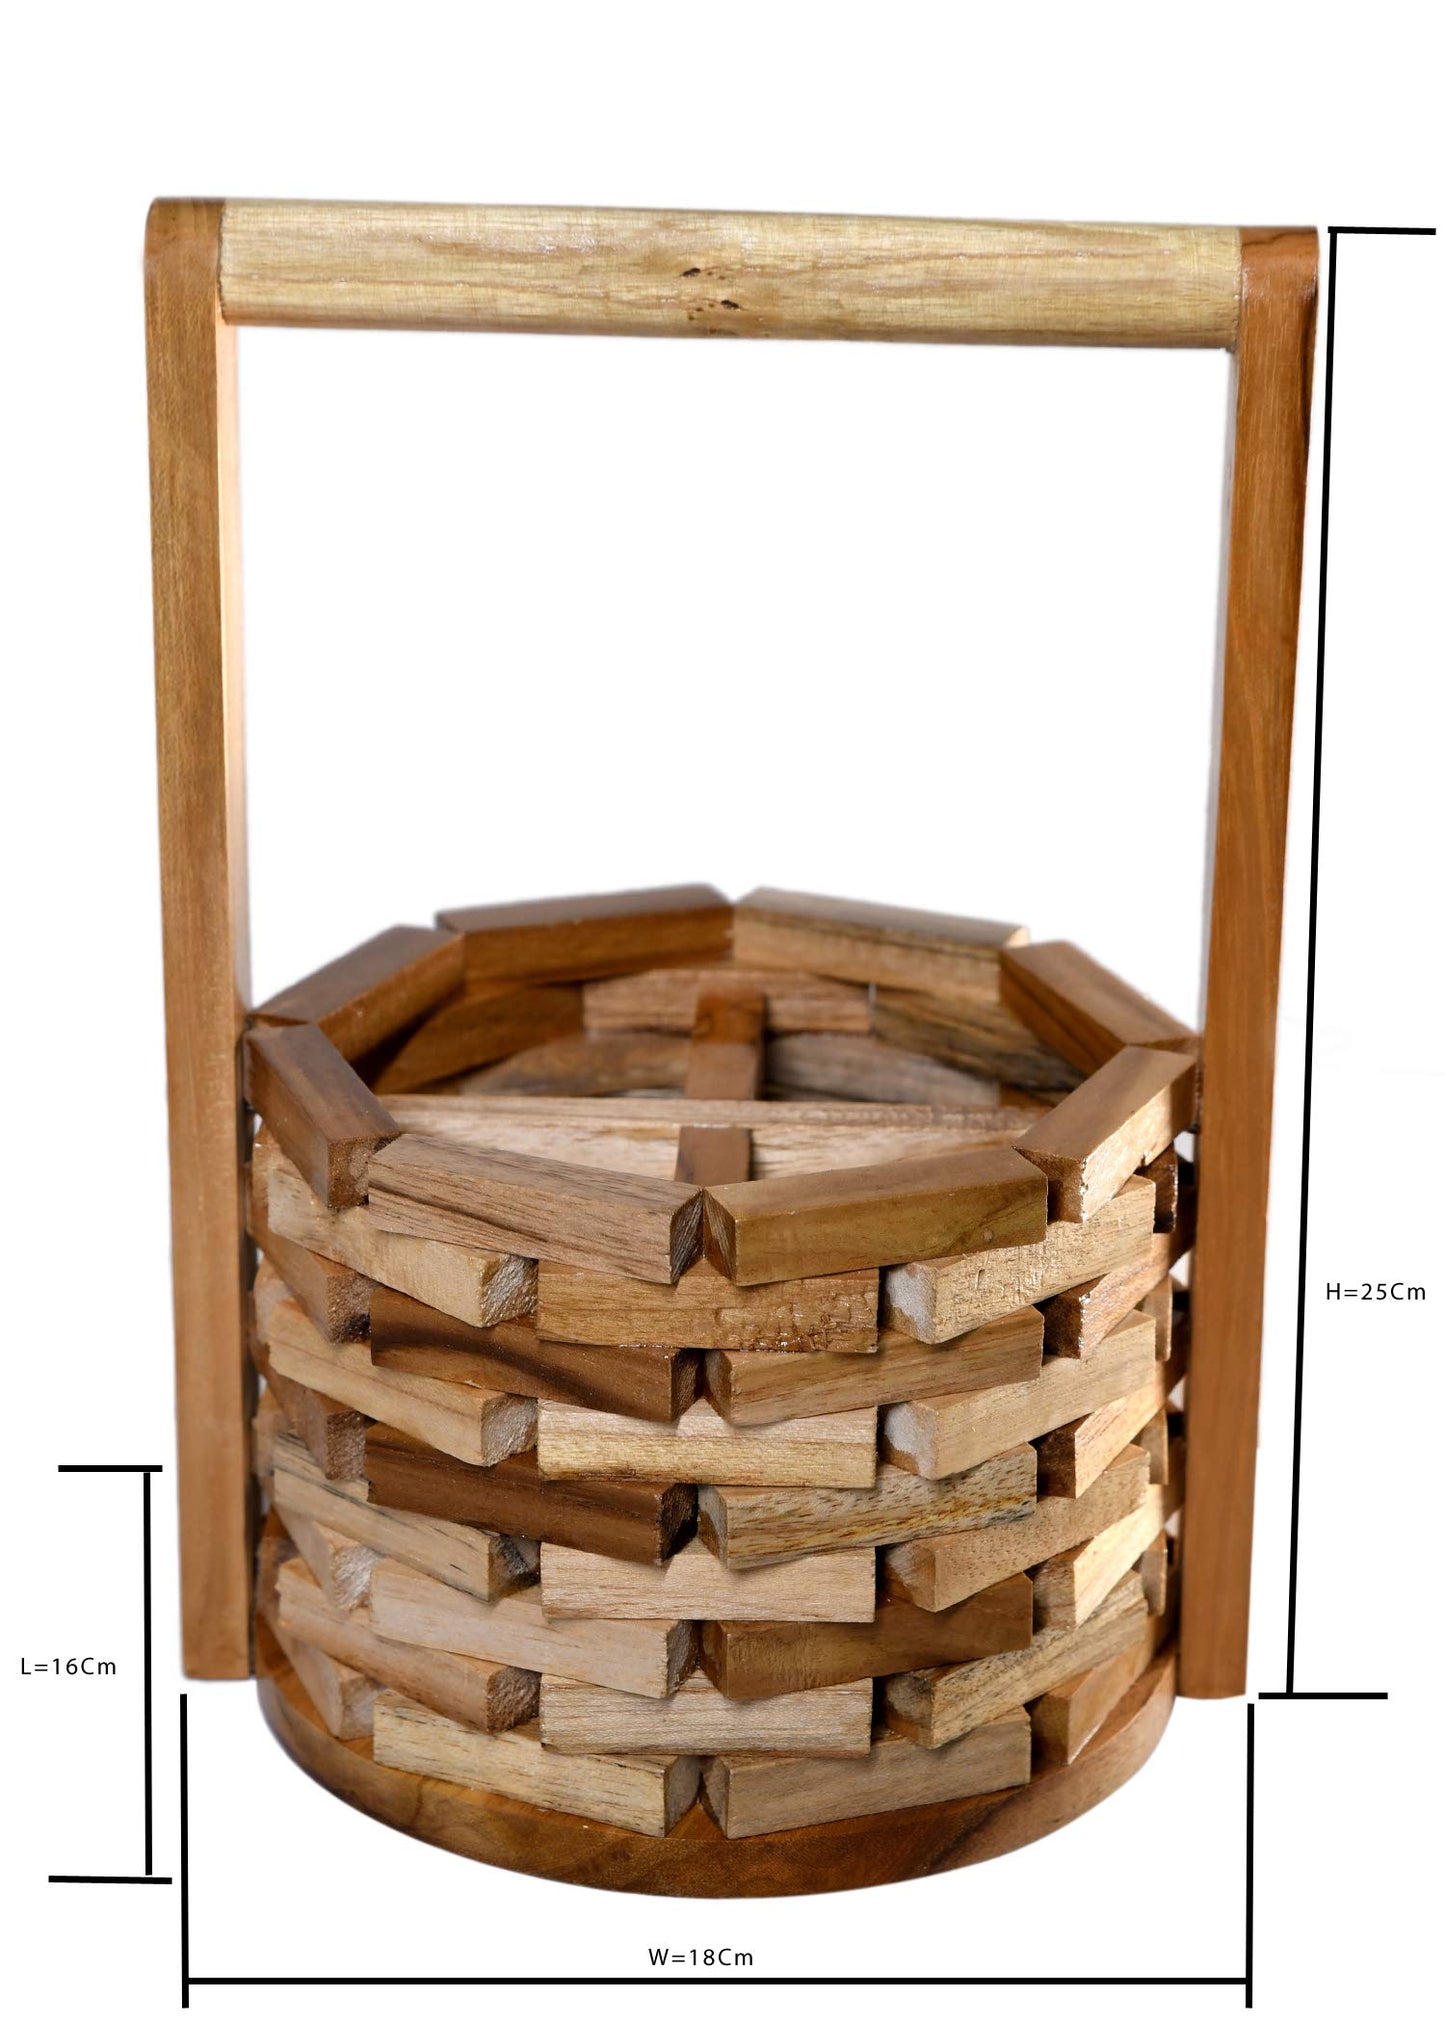 The Weaver's Nest Wishing Well Teak Wood Cutlery Holder for Dining Table